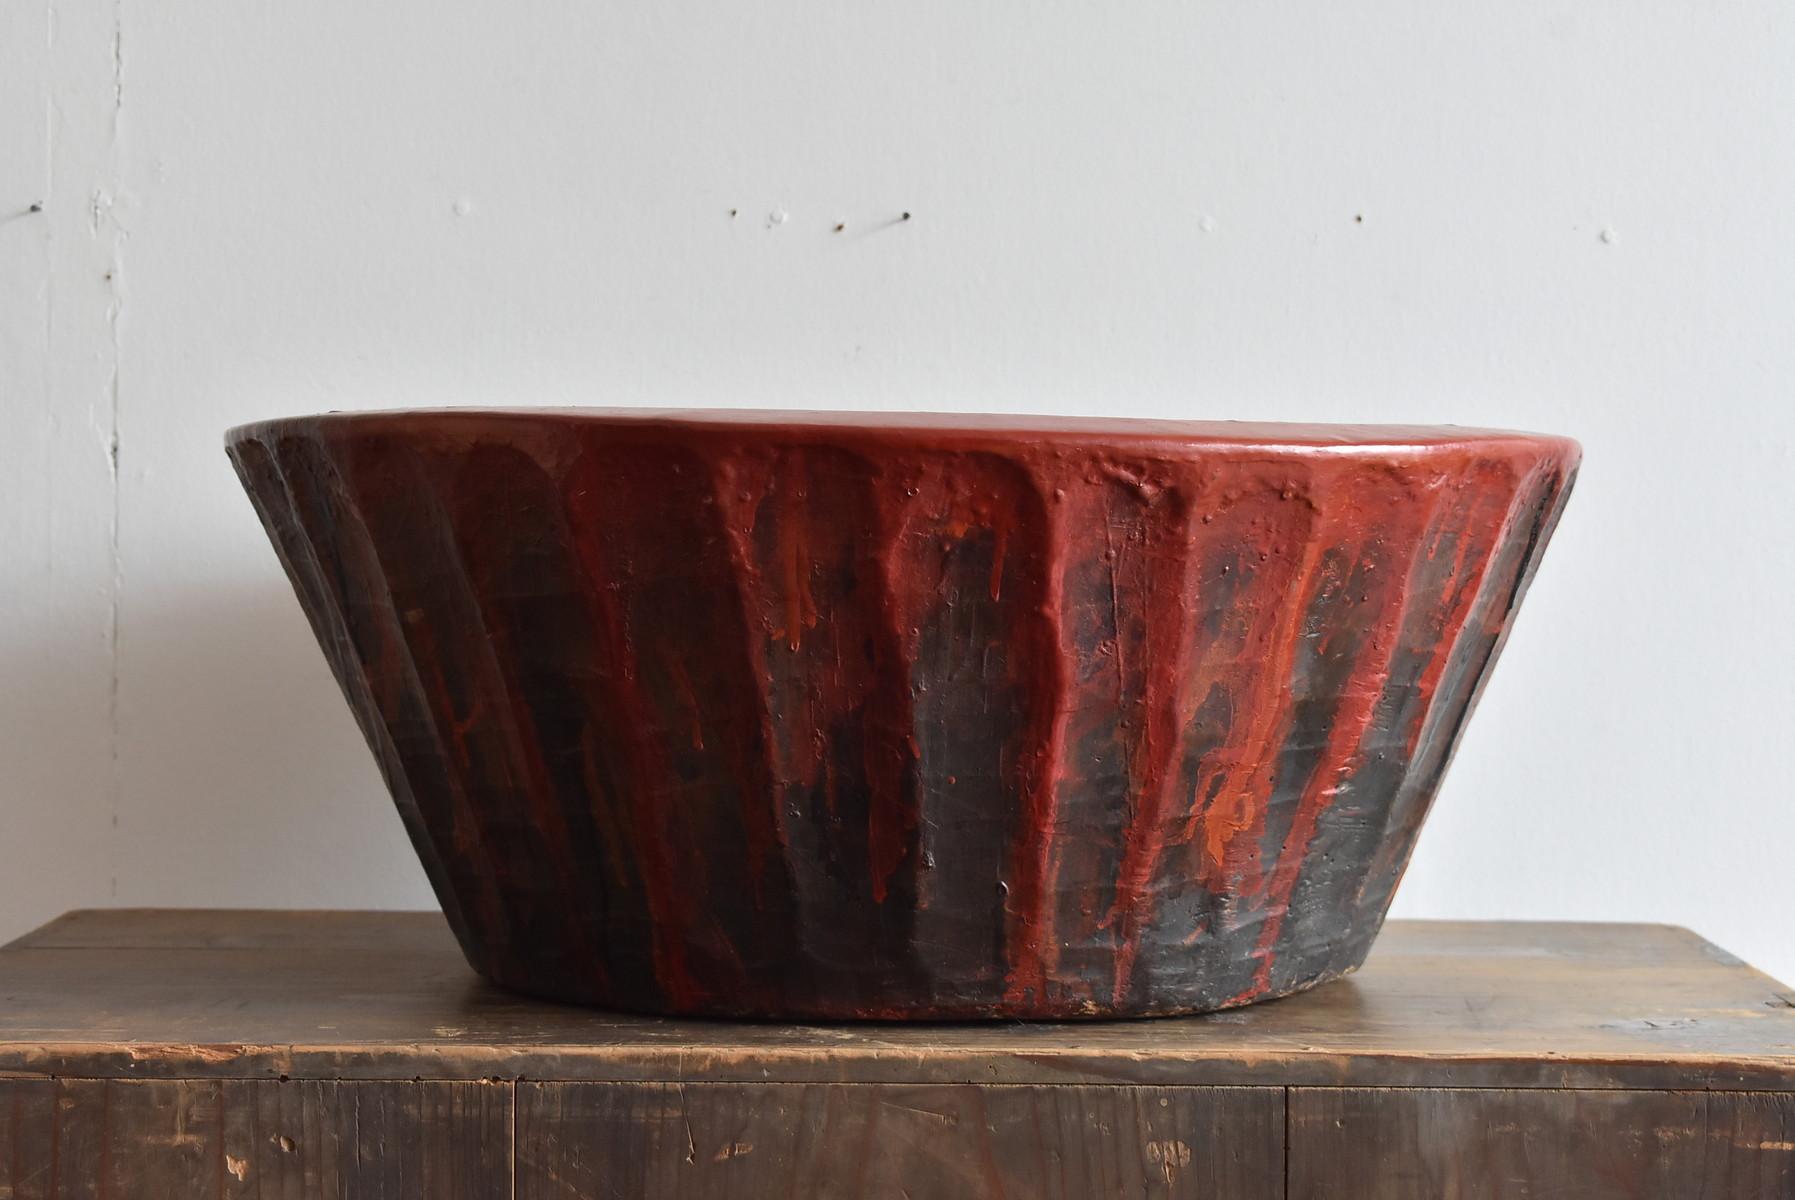 Meiji Lacquer Wooden Bowl Used by Japanese Lacquer Craftsmen / Antique Lacquerware Too